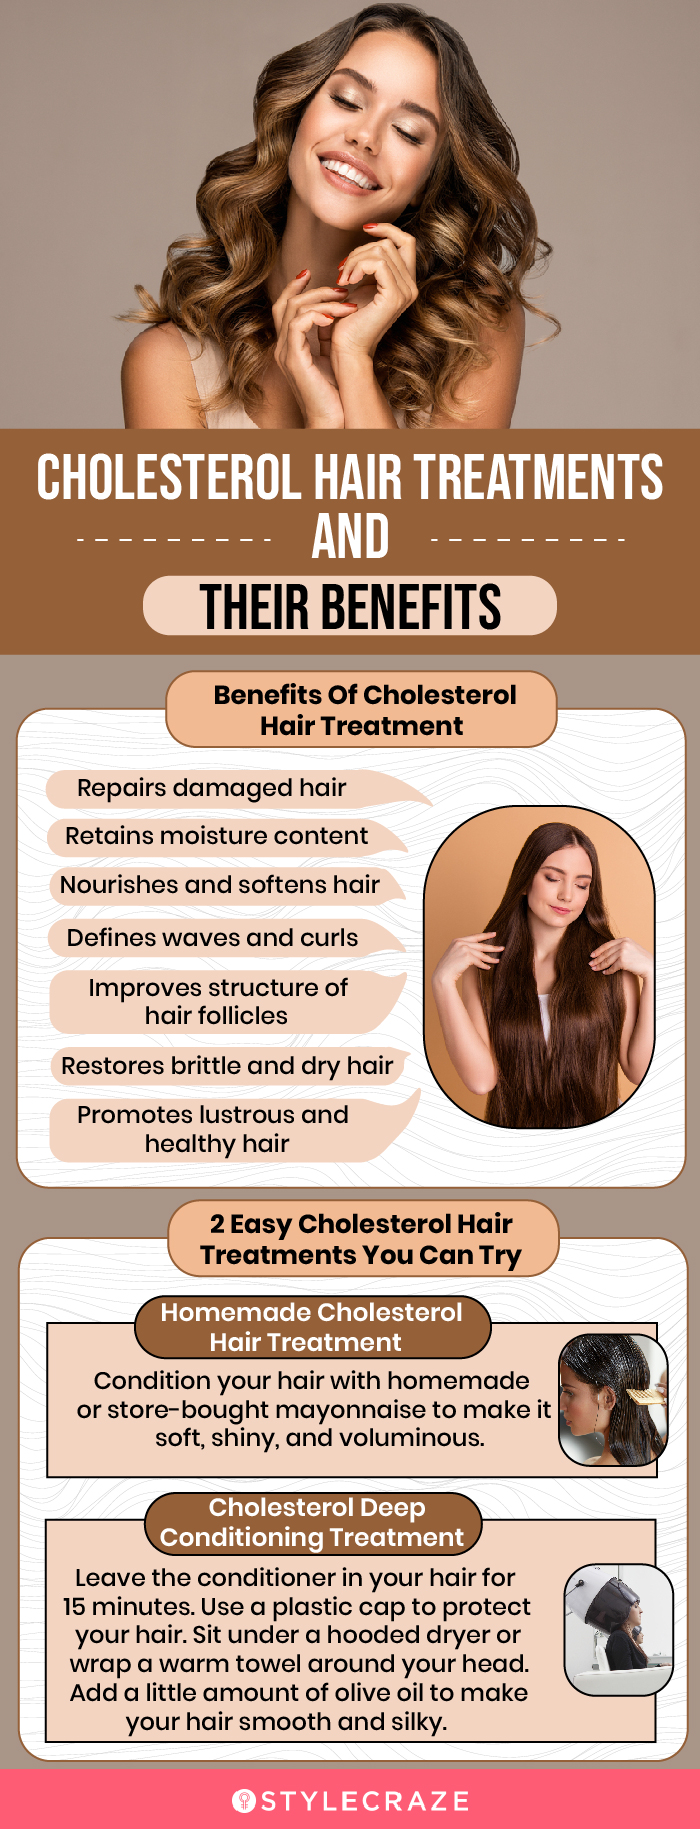 cholesterol hair treatments and their benefits (infographic)